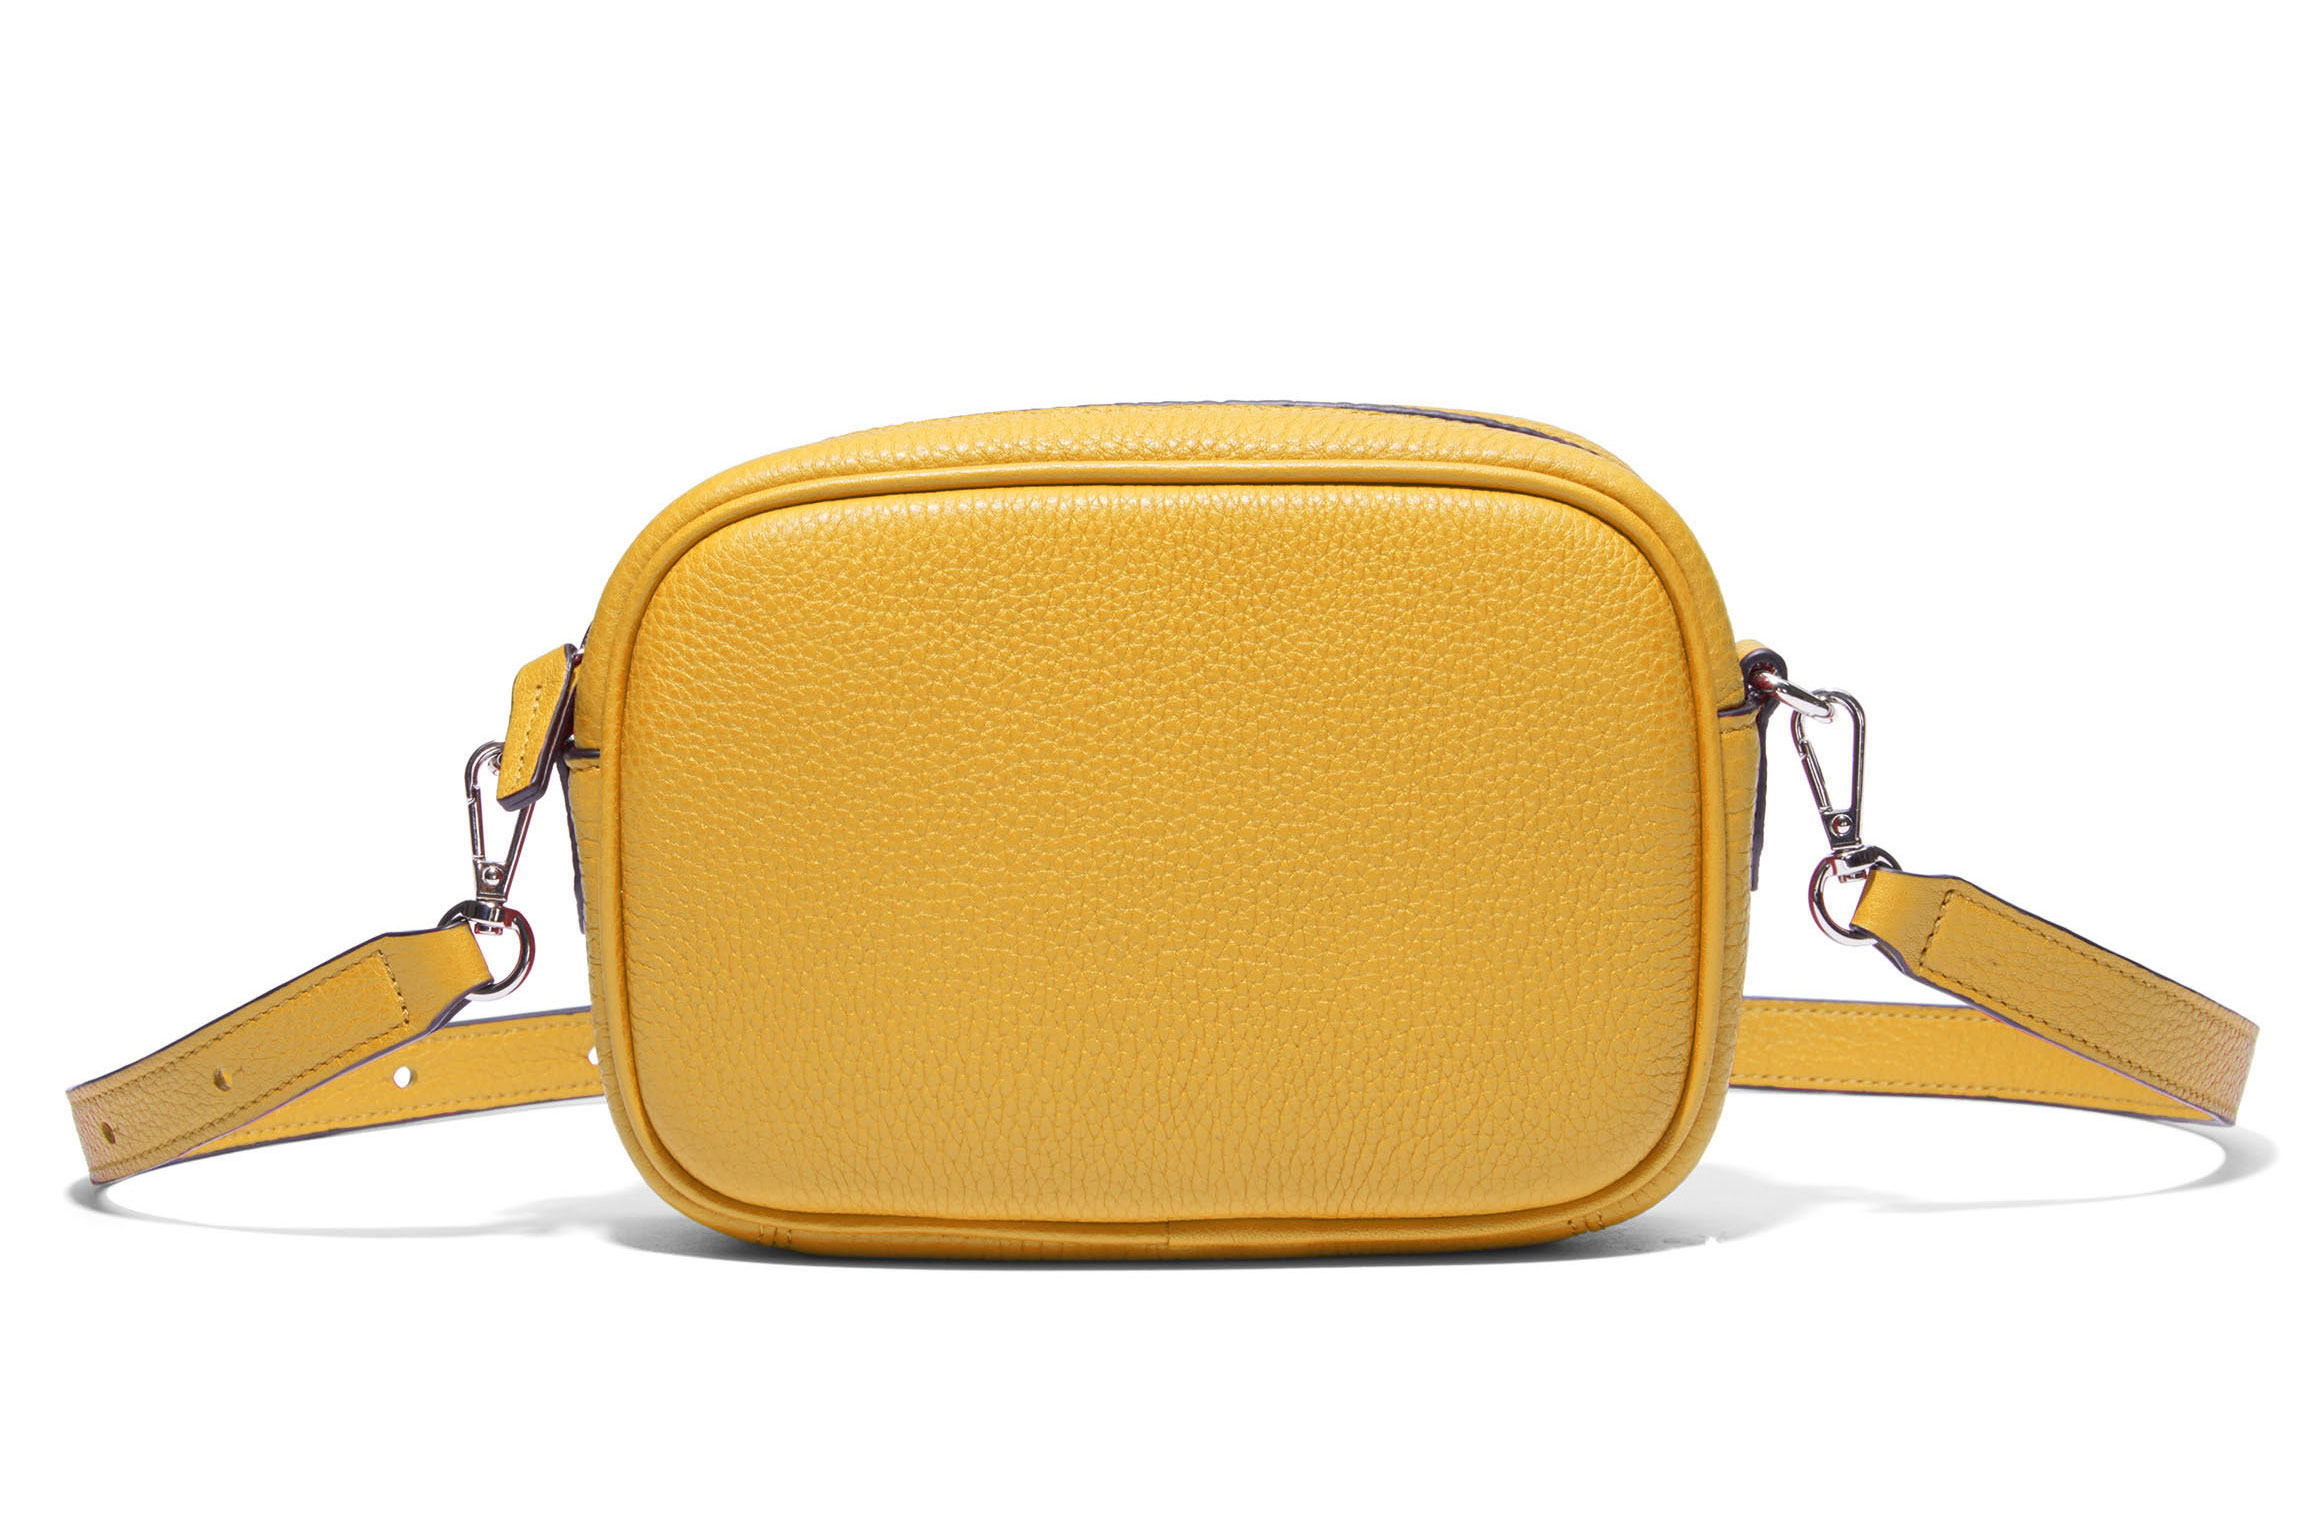 Dallas Style Edit: The Fanny Pack - D Magazine